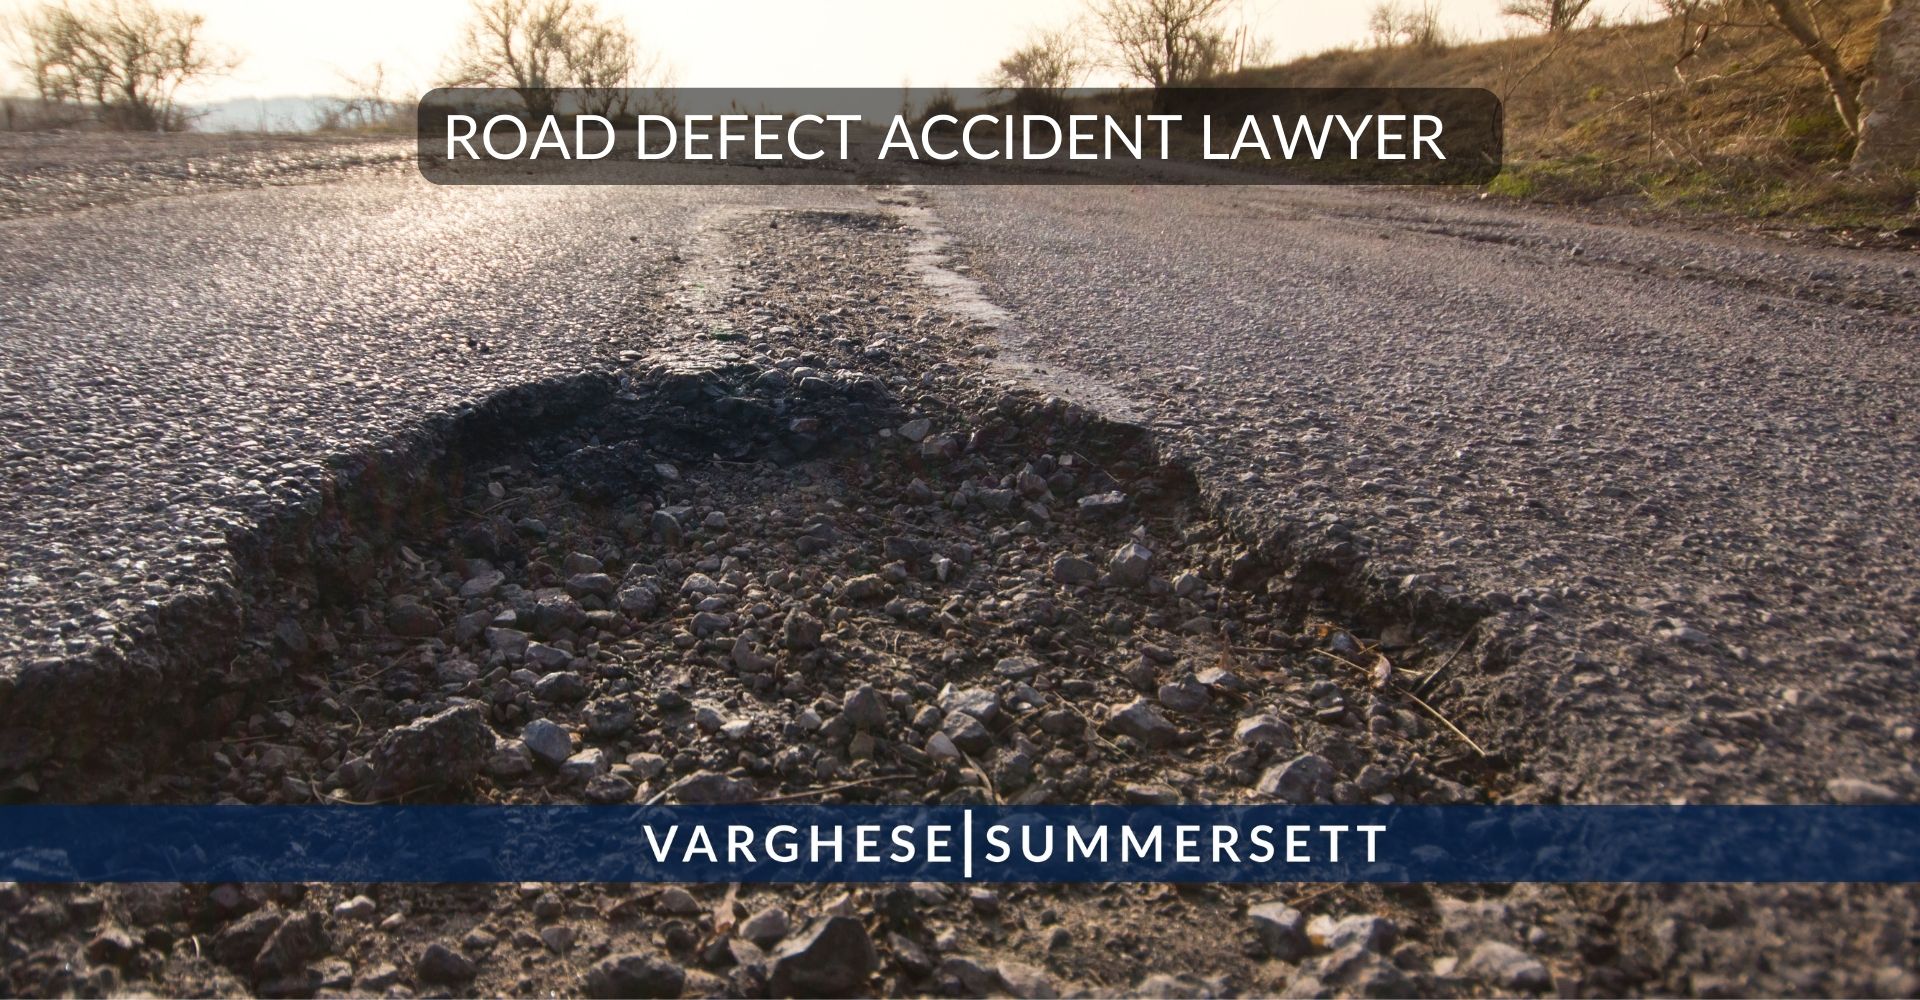 Road defect accident lawyer